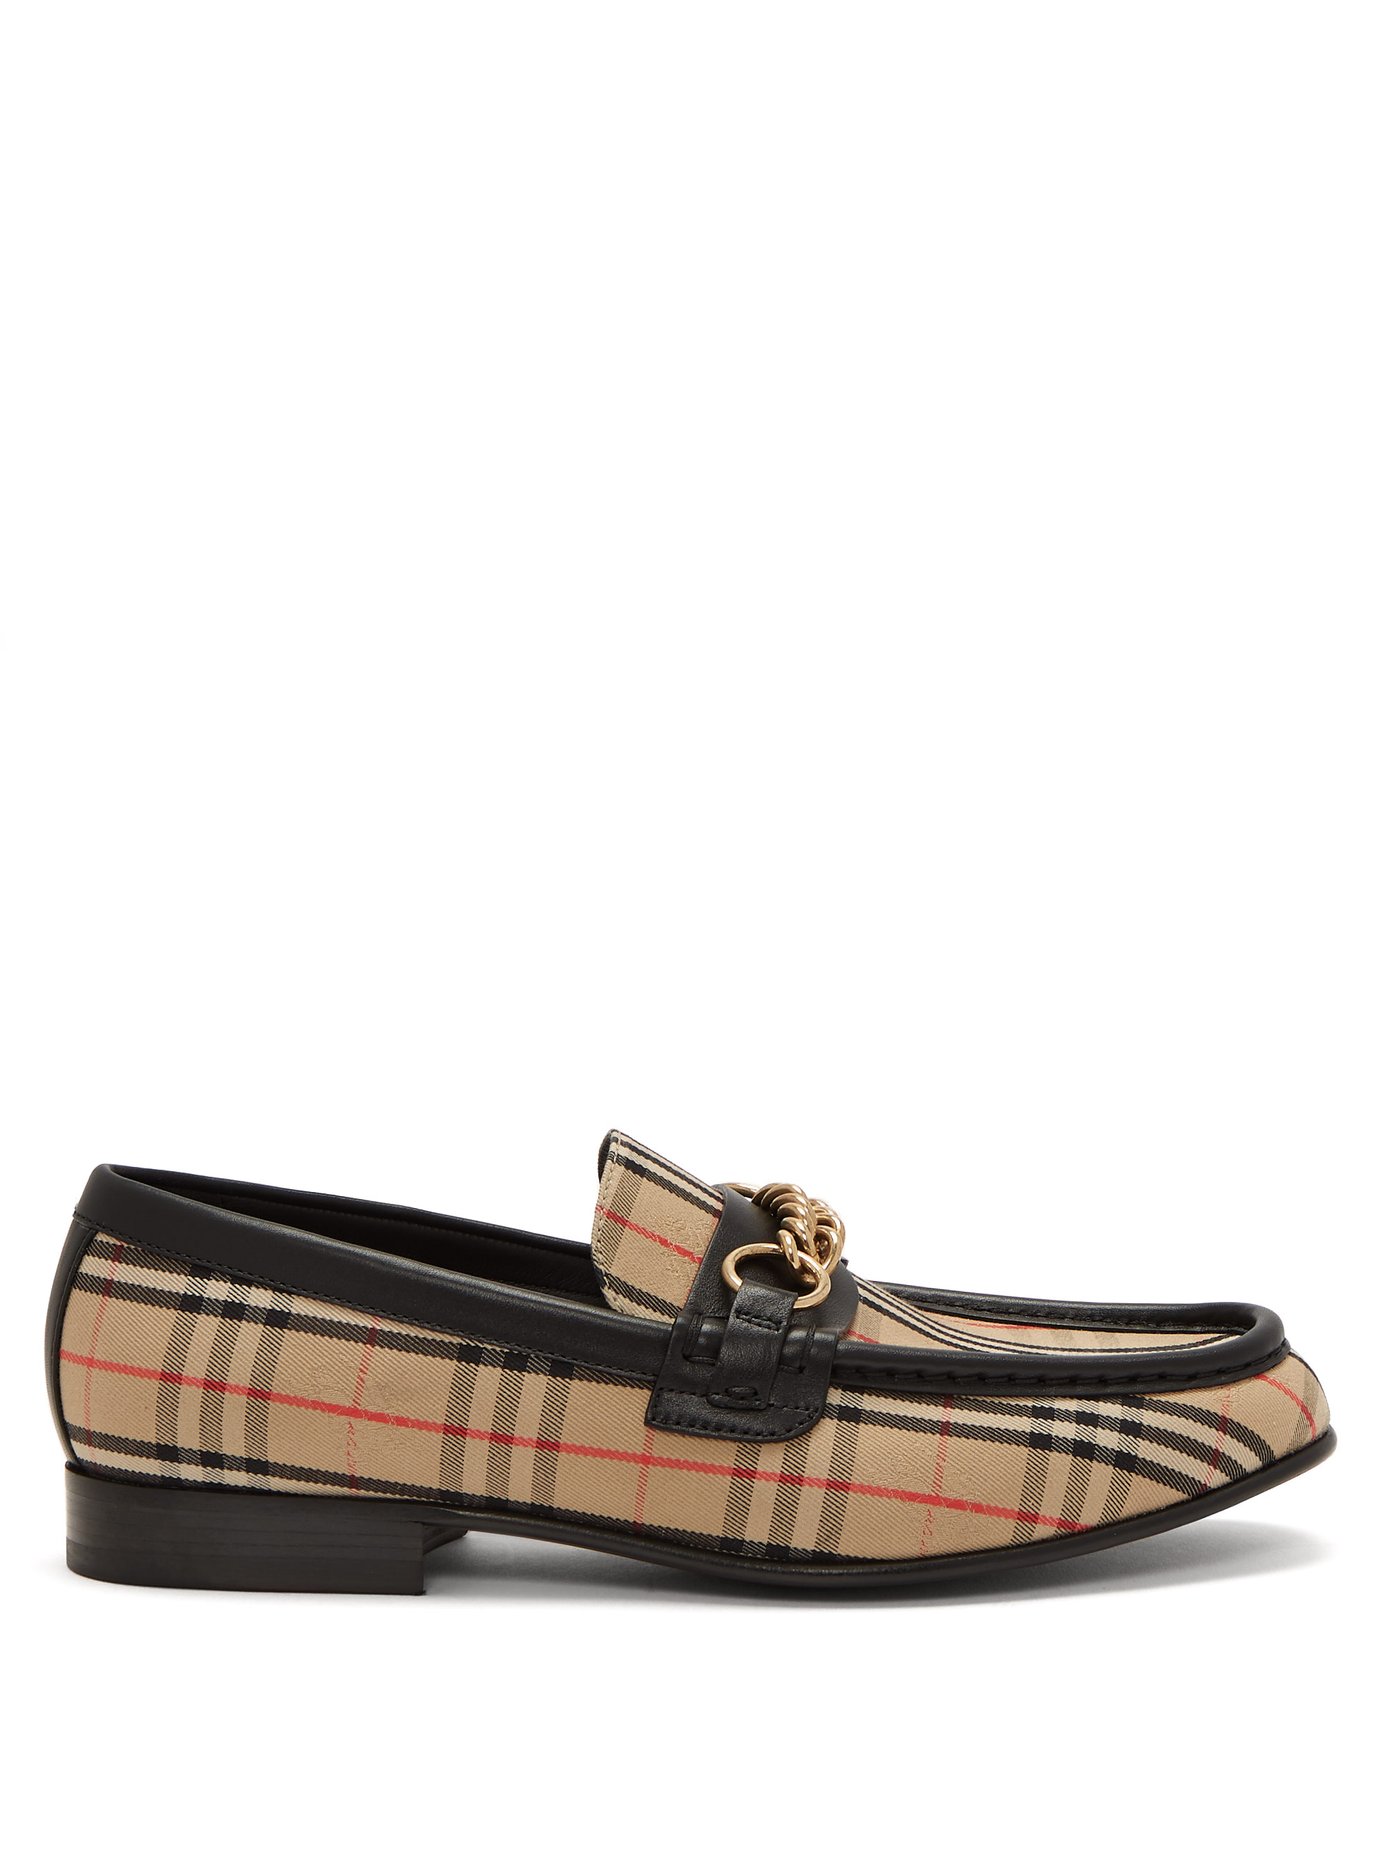 Moorley House-check loafers | Burberry 